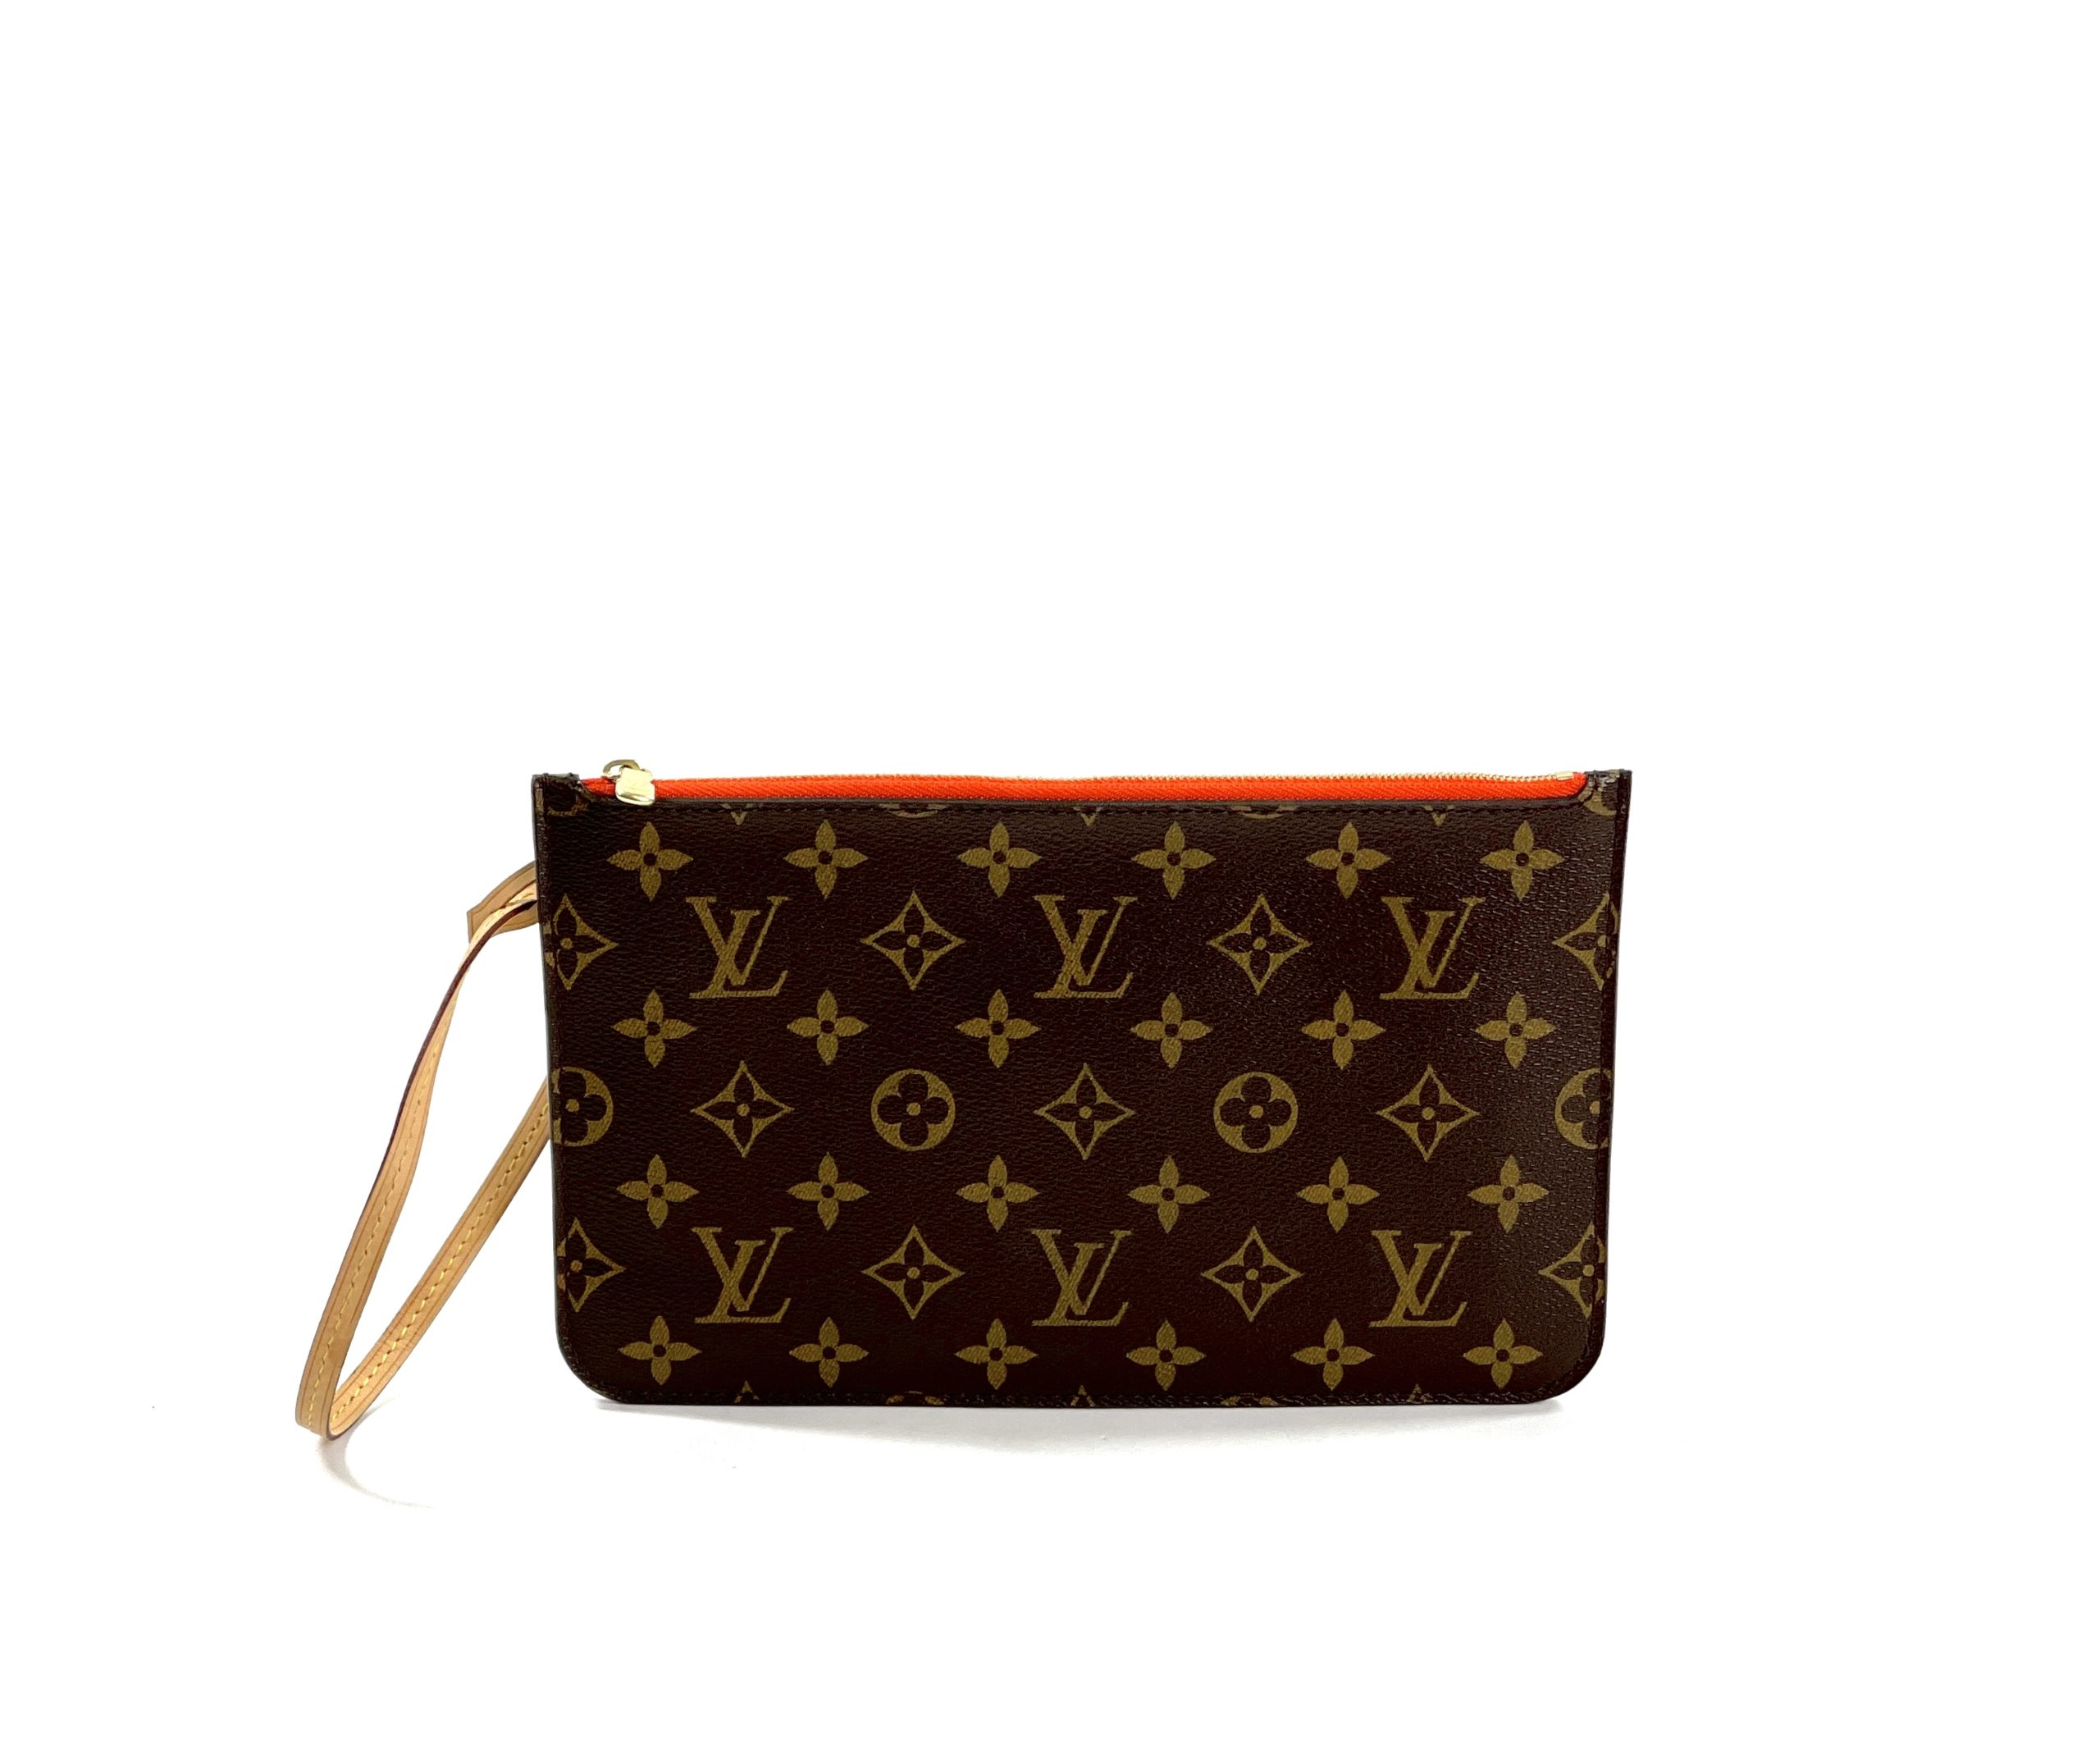 Instant Reveal: Neo Neverfull GM in Piment (Orange) and Accessories